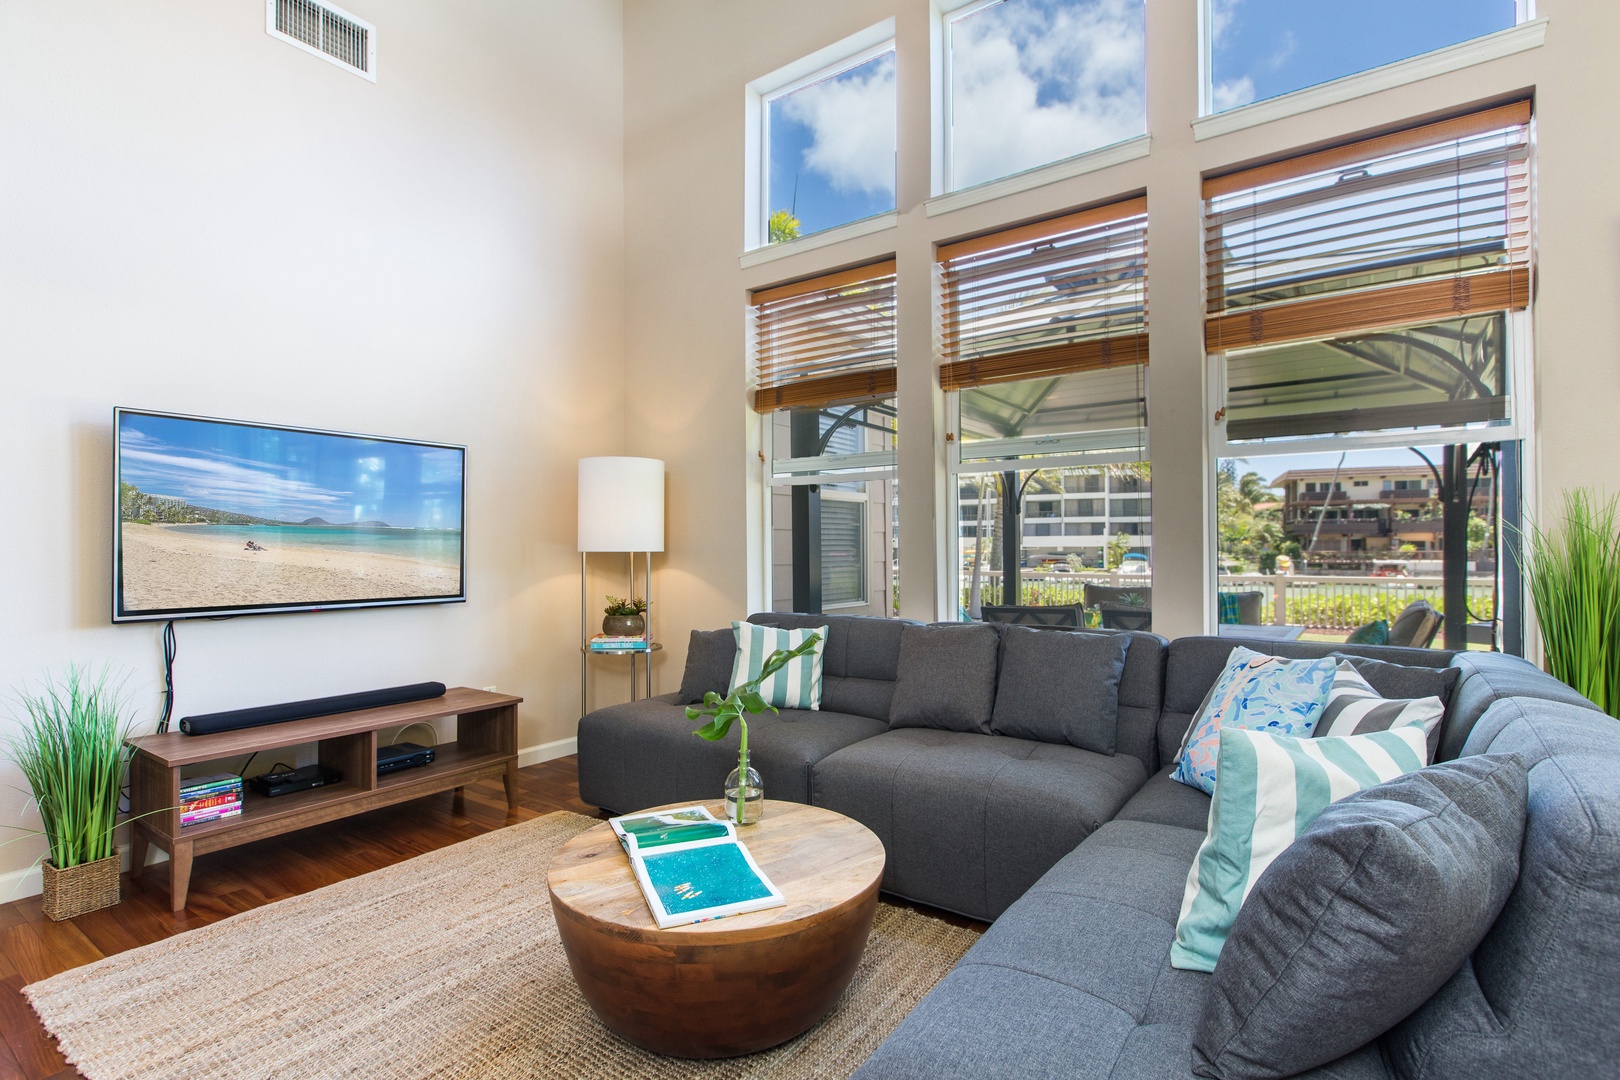 Honolulu Vacation Rentals, Ohana Kai - Unwind in comfort at Ohana Kai with its spacious couch, elegant wood flooring, refreshing air conditioning, and seamless wireless connectivity.